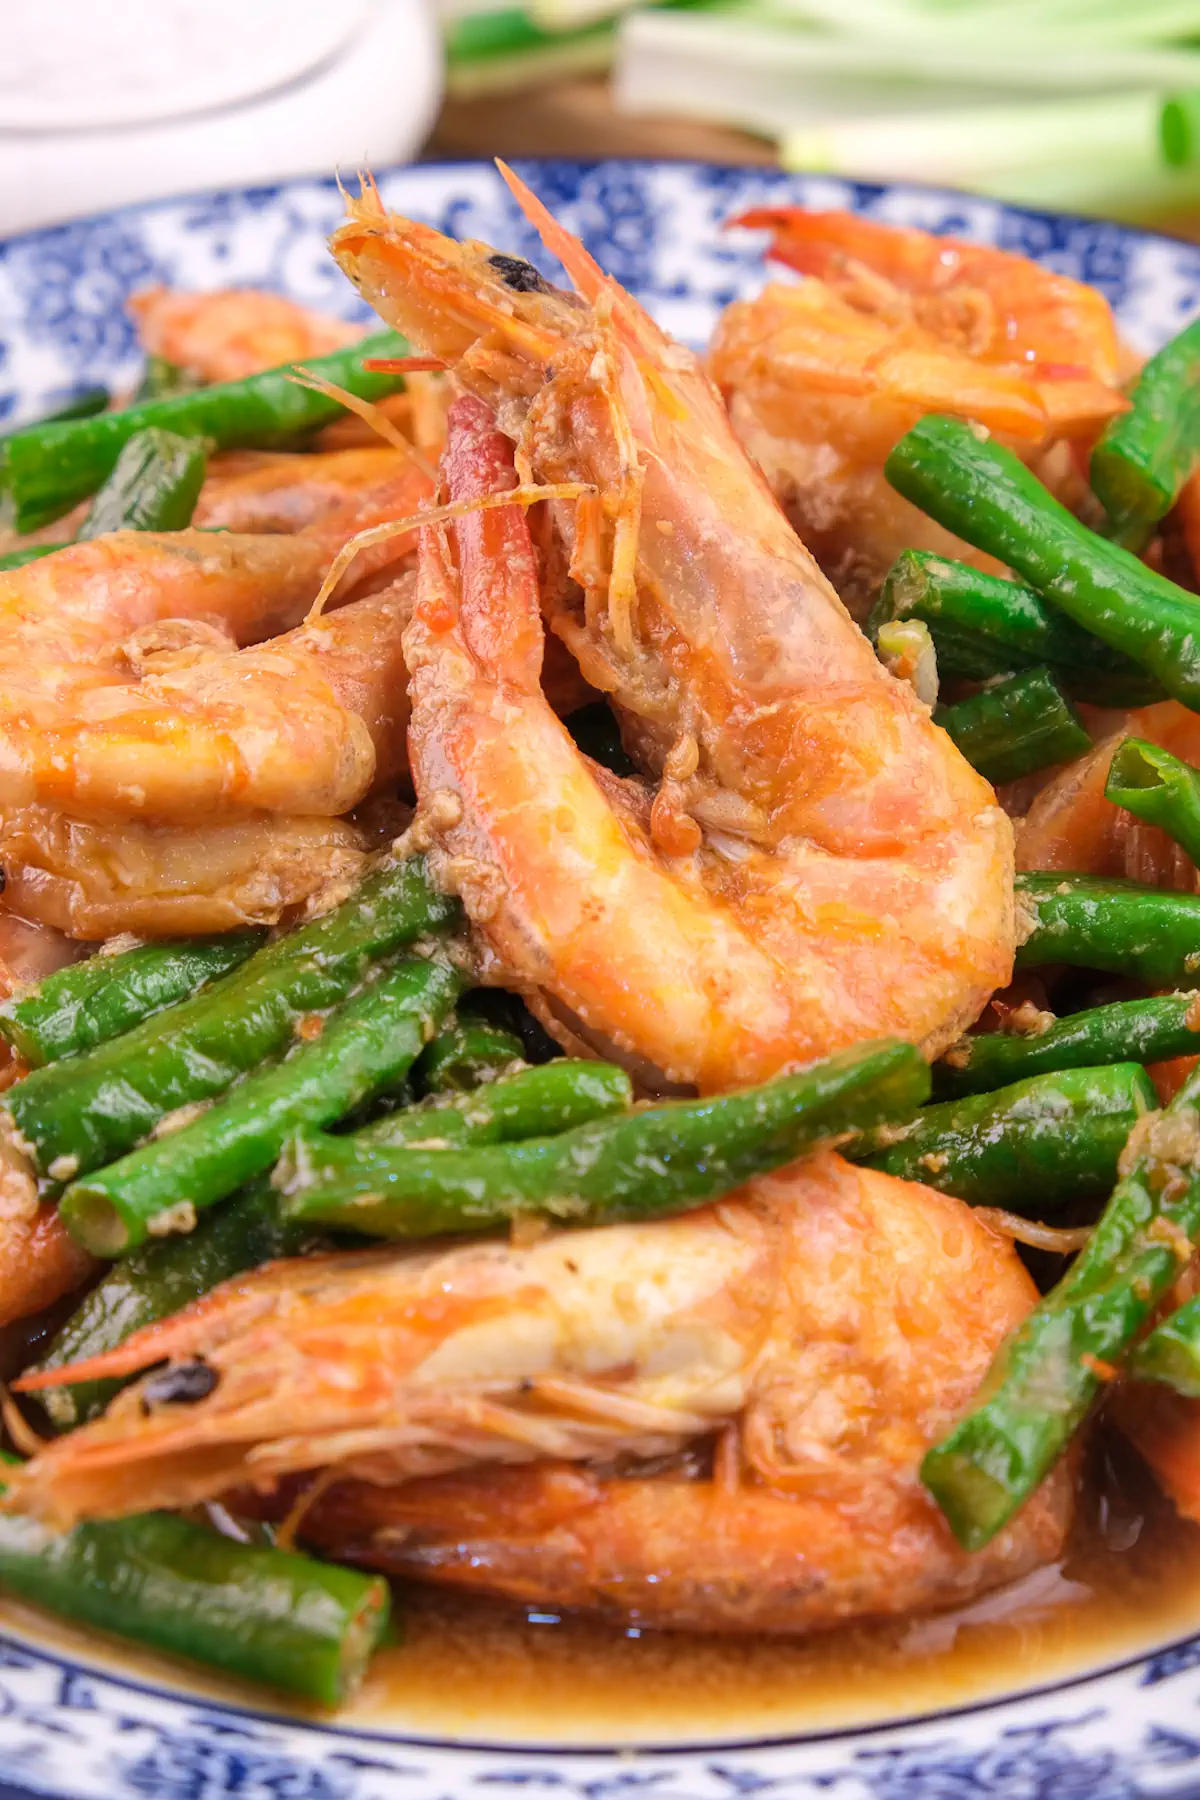 Keto shrimp stir fry with string beans in spicy sambal oelek served on a plate.